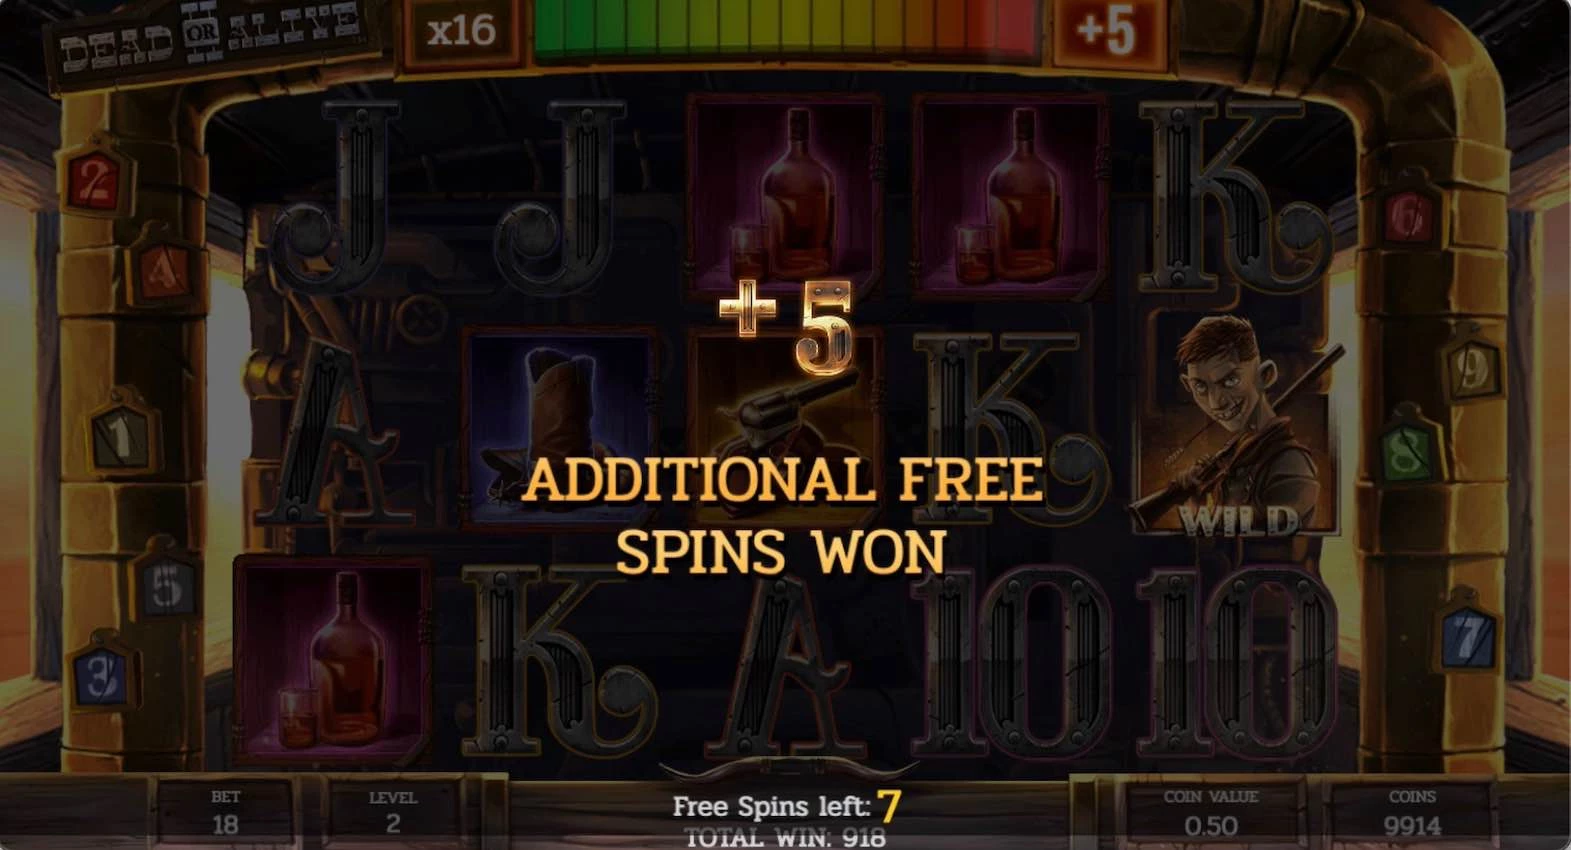 Dead or Alive 2 Slot by NetEnt - Plus 5 Free Spins